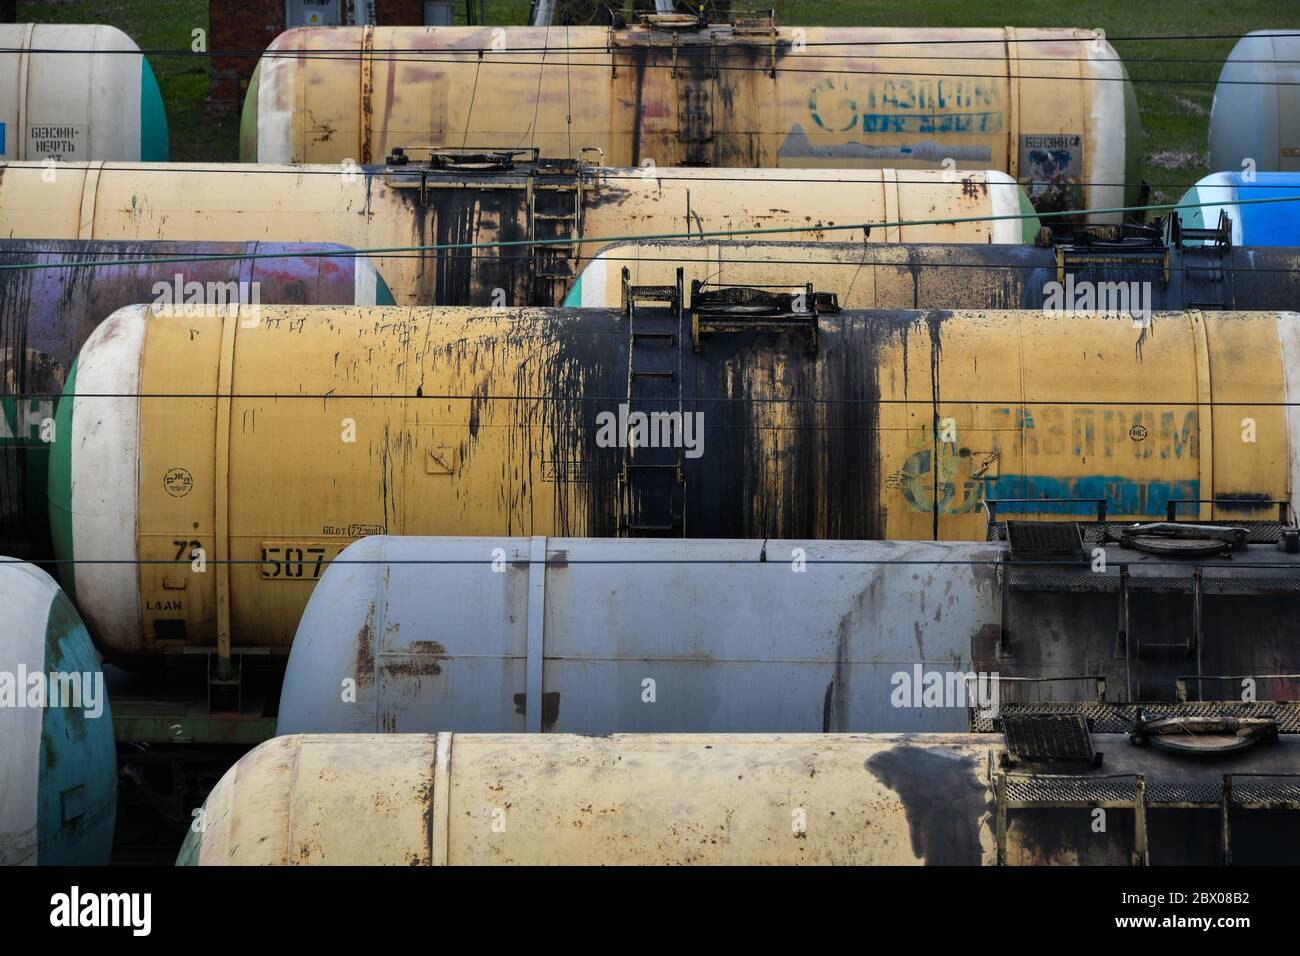 Moscow, Russia. 2nd May, 2020. Railway tank cars with oil in Moscow, Russia. Stock Photo